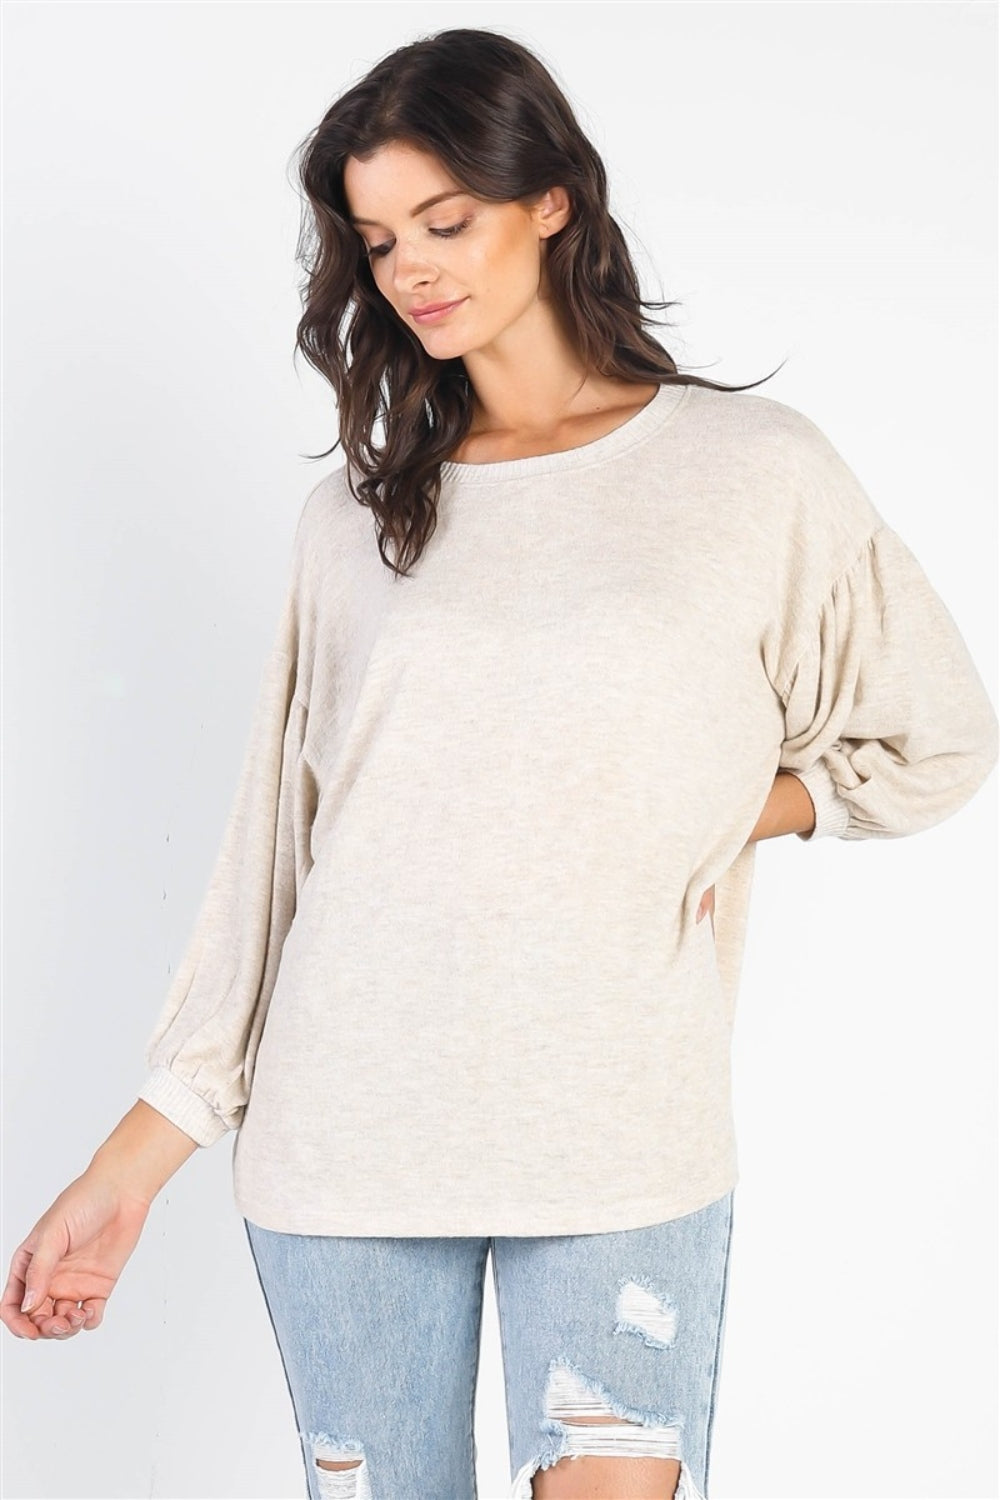 Relaxed & Effortless Drop-Shoulder Puff-Sleeve Top (4 Colors)